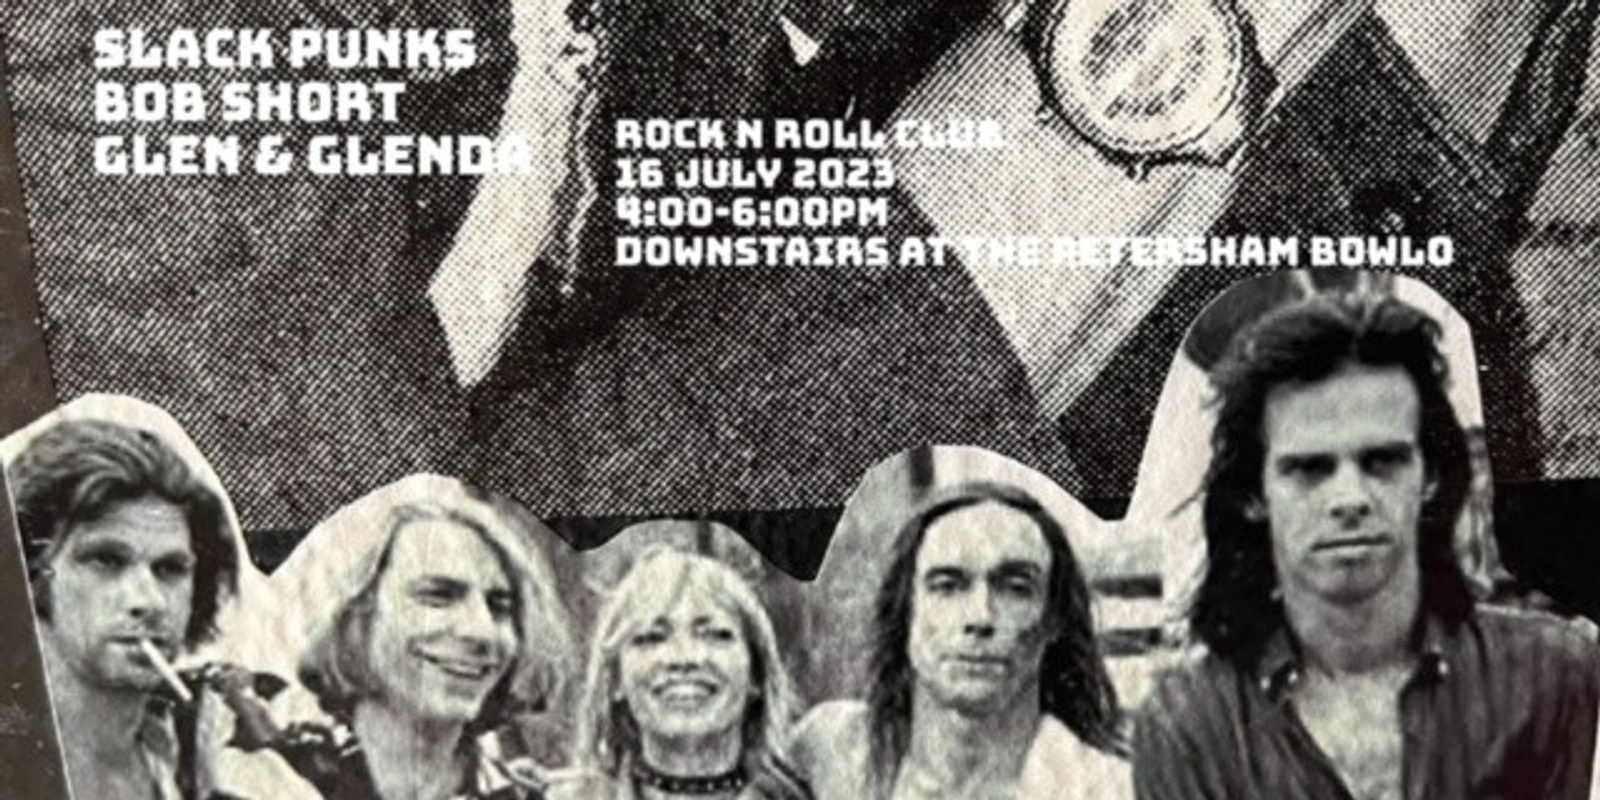 Banner image for Rock n Roll Club